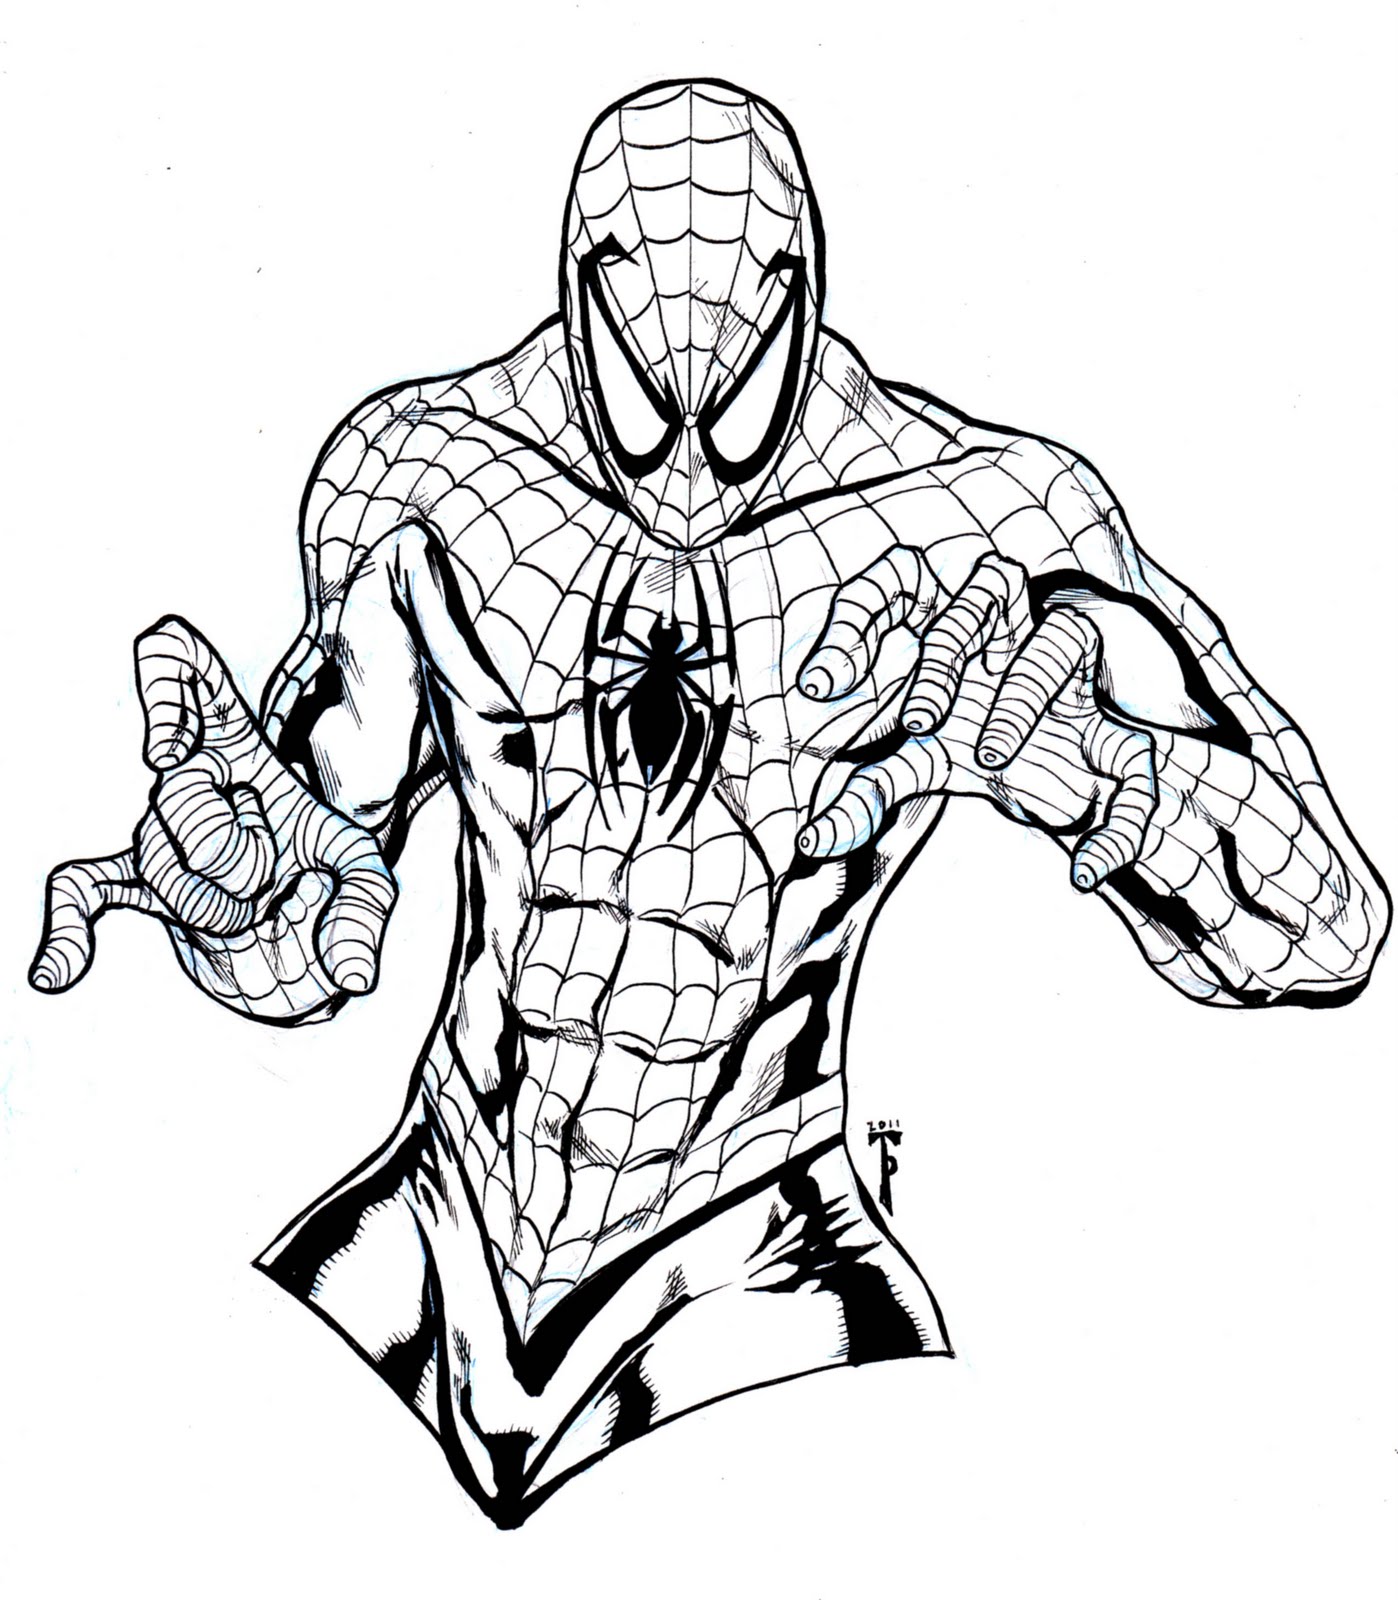  Spiderman Coloring pages | Kids coloring pages | Free coloring pages | #19